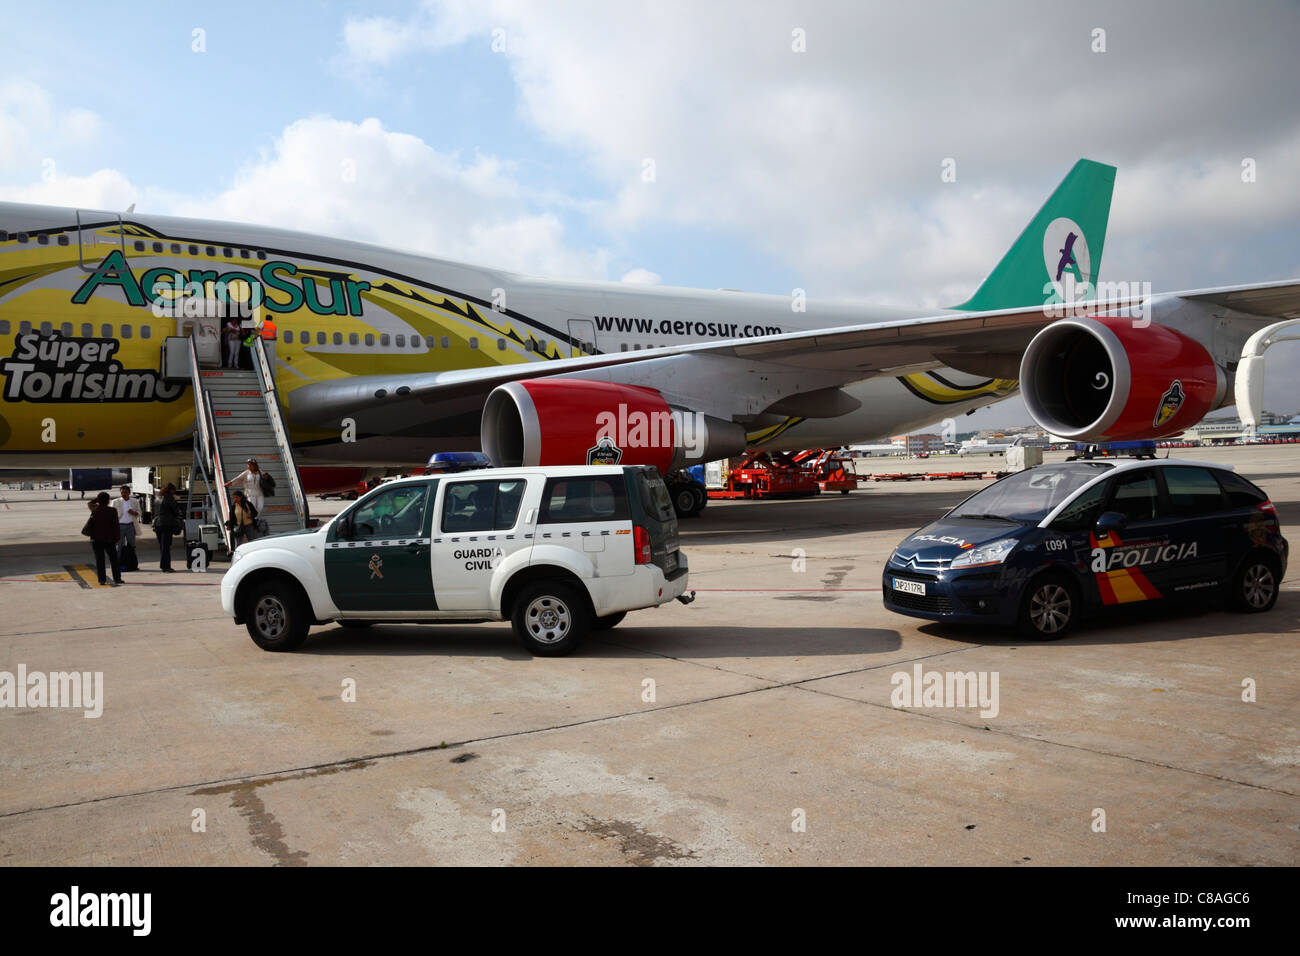 Civil Guard and police vehicles wait as passengers disembark from Aerosur flight from Bolivia at Madrid Barajas airport , Spain Stock Photo